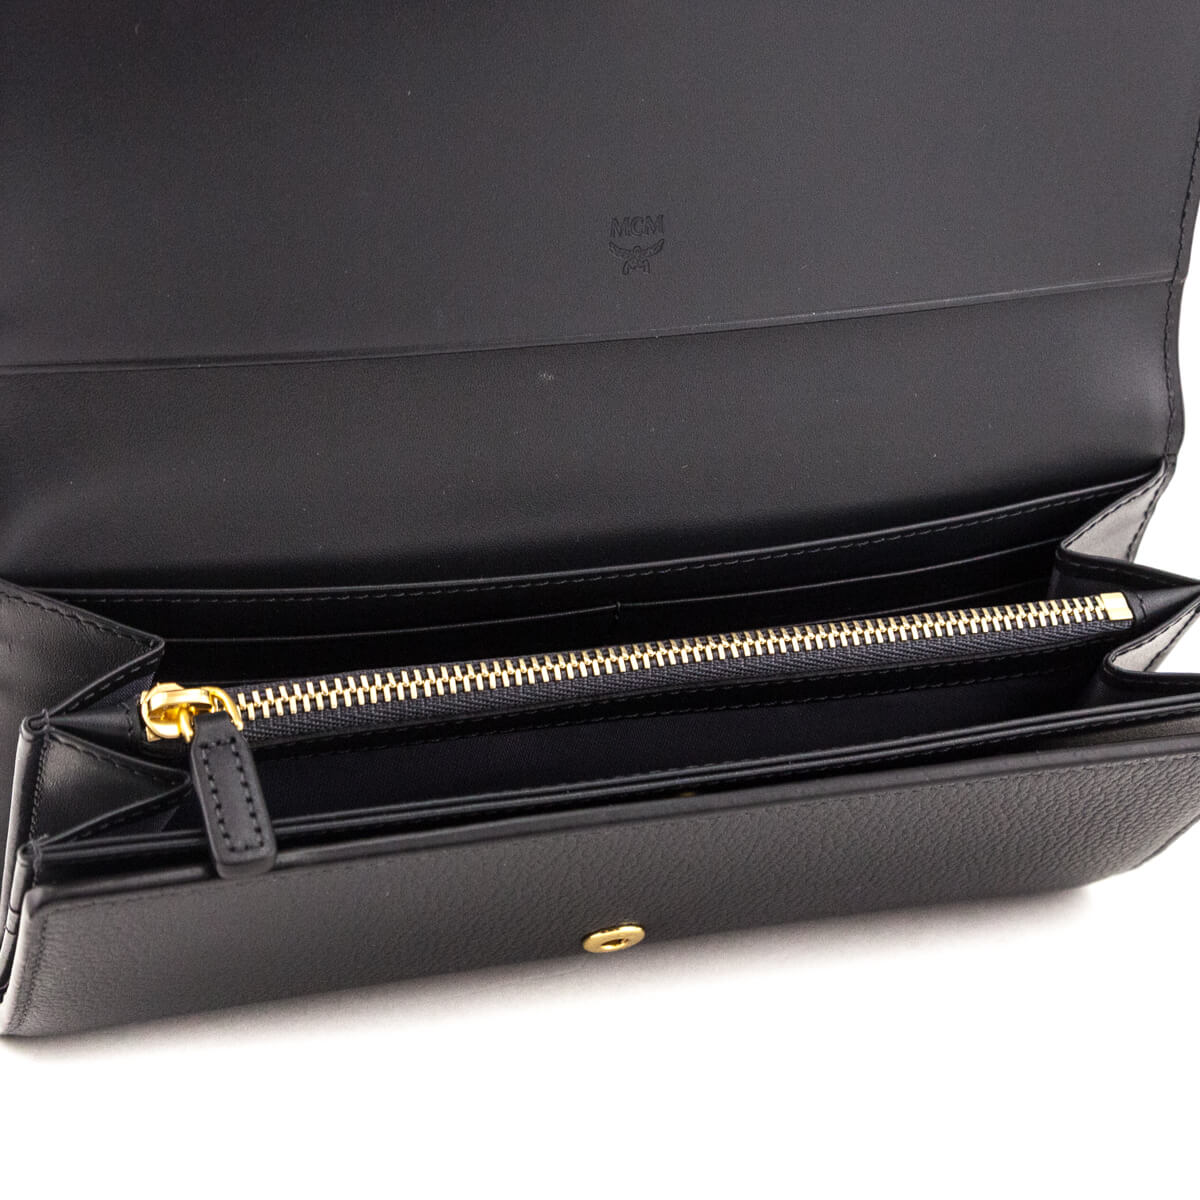 MCM Black Grained Leather Continental Wallet - Love that Bag etc - Preowned Authentic Designer Handbags & Preloved Fashions